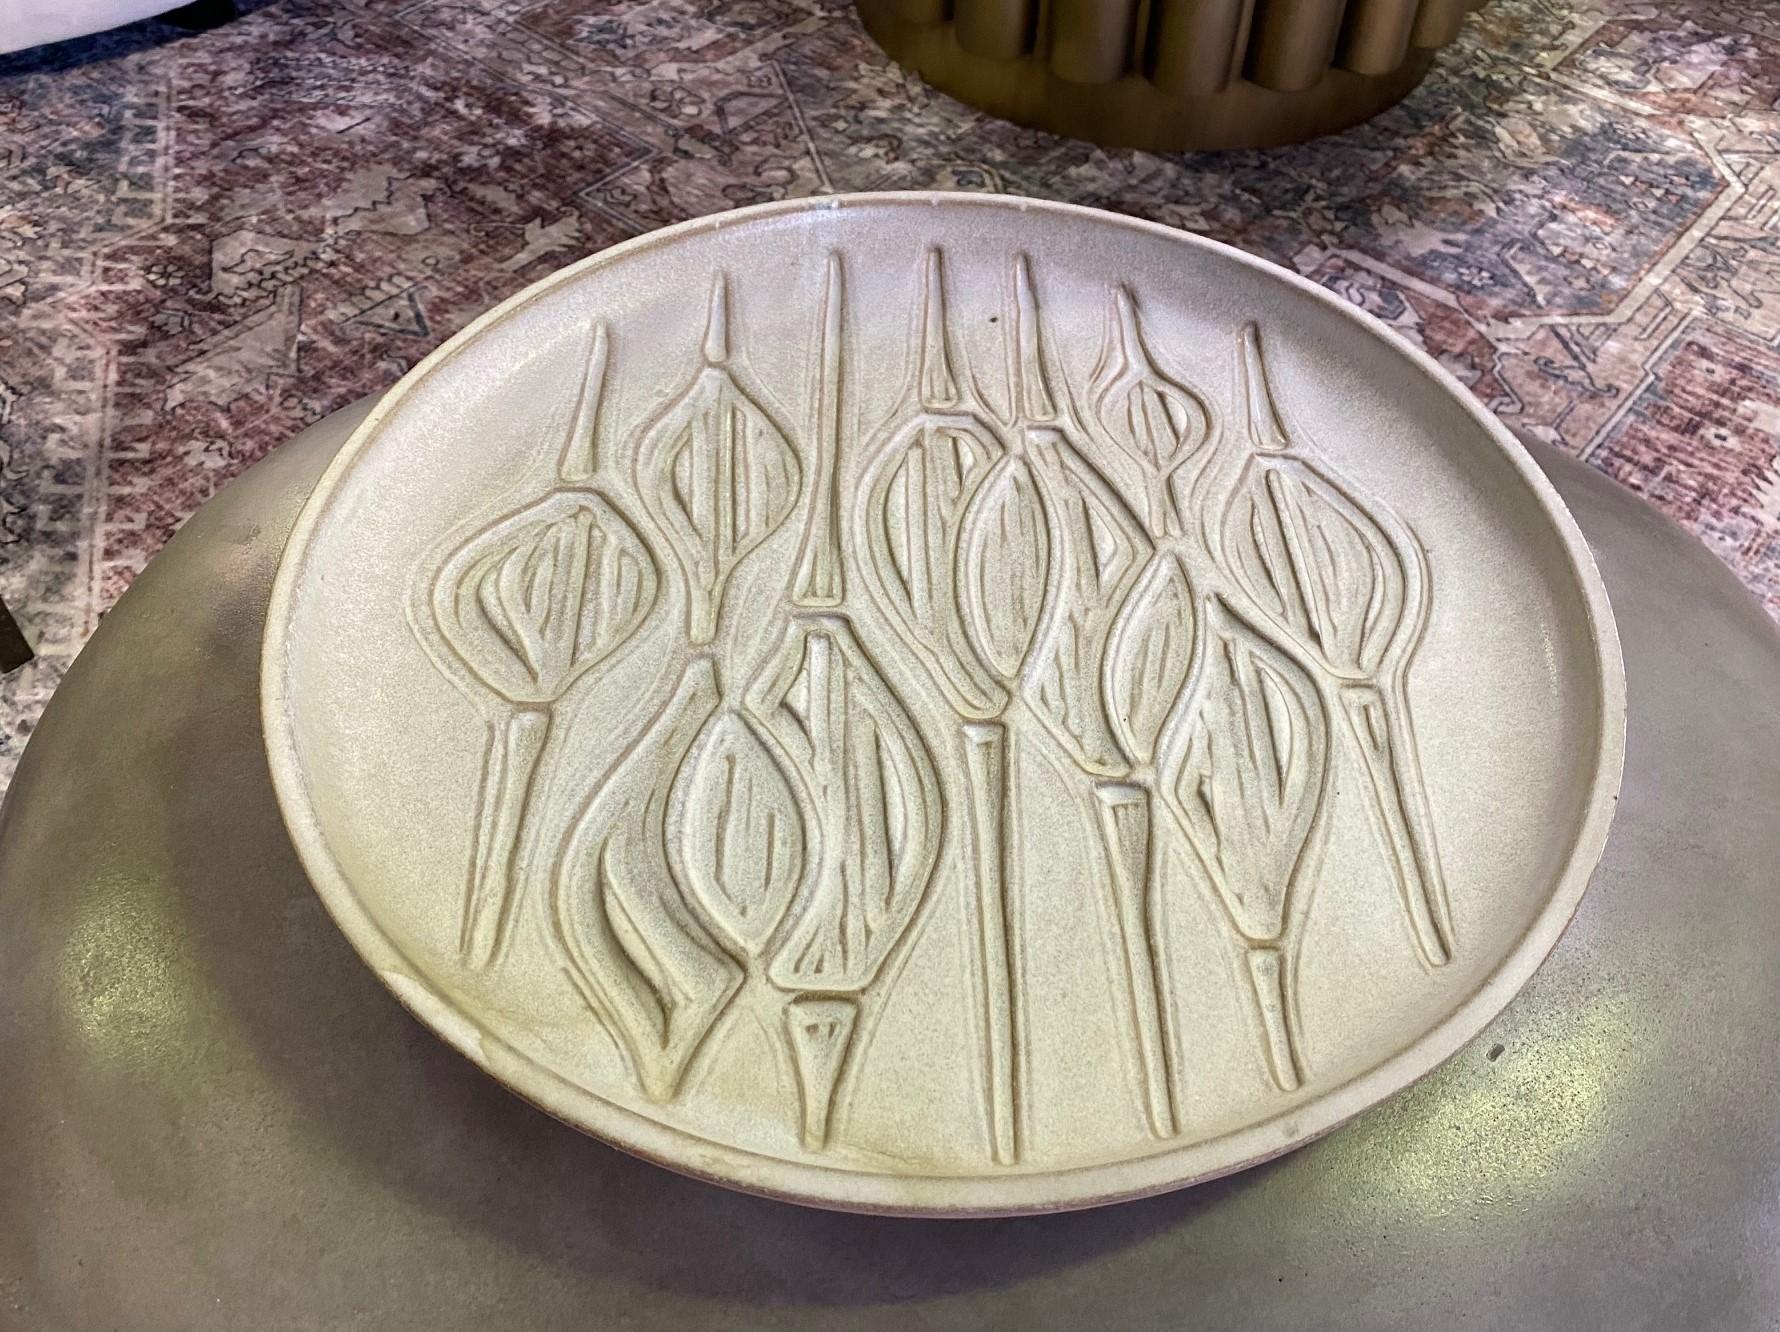 A wonderfully made and beautifully designed Mid-Century Modern pottery charger by famed California potter and sculptor Robert Maxwell. 

Maxwell co-founded Earthgender pottery with fellow potter David Cressey. 

This charger/platter was made at